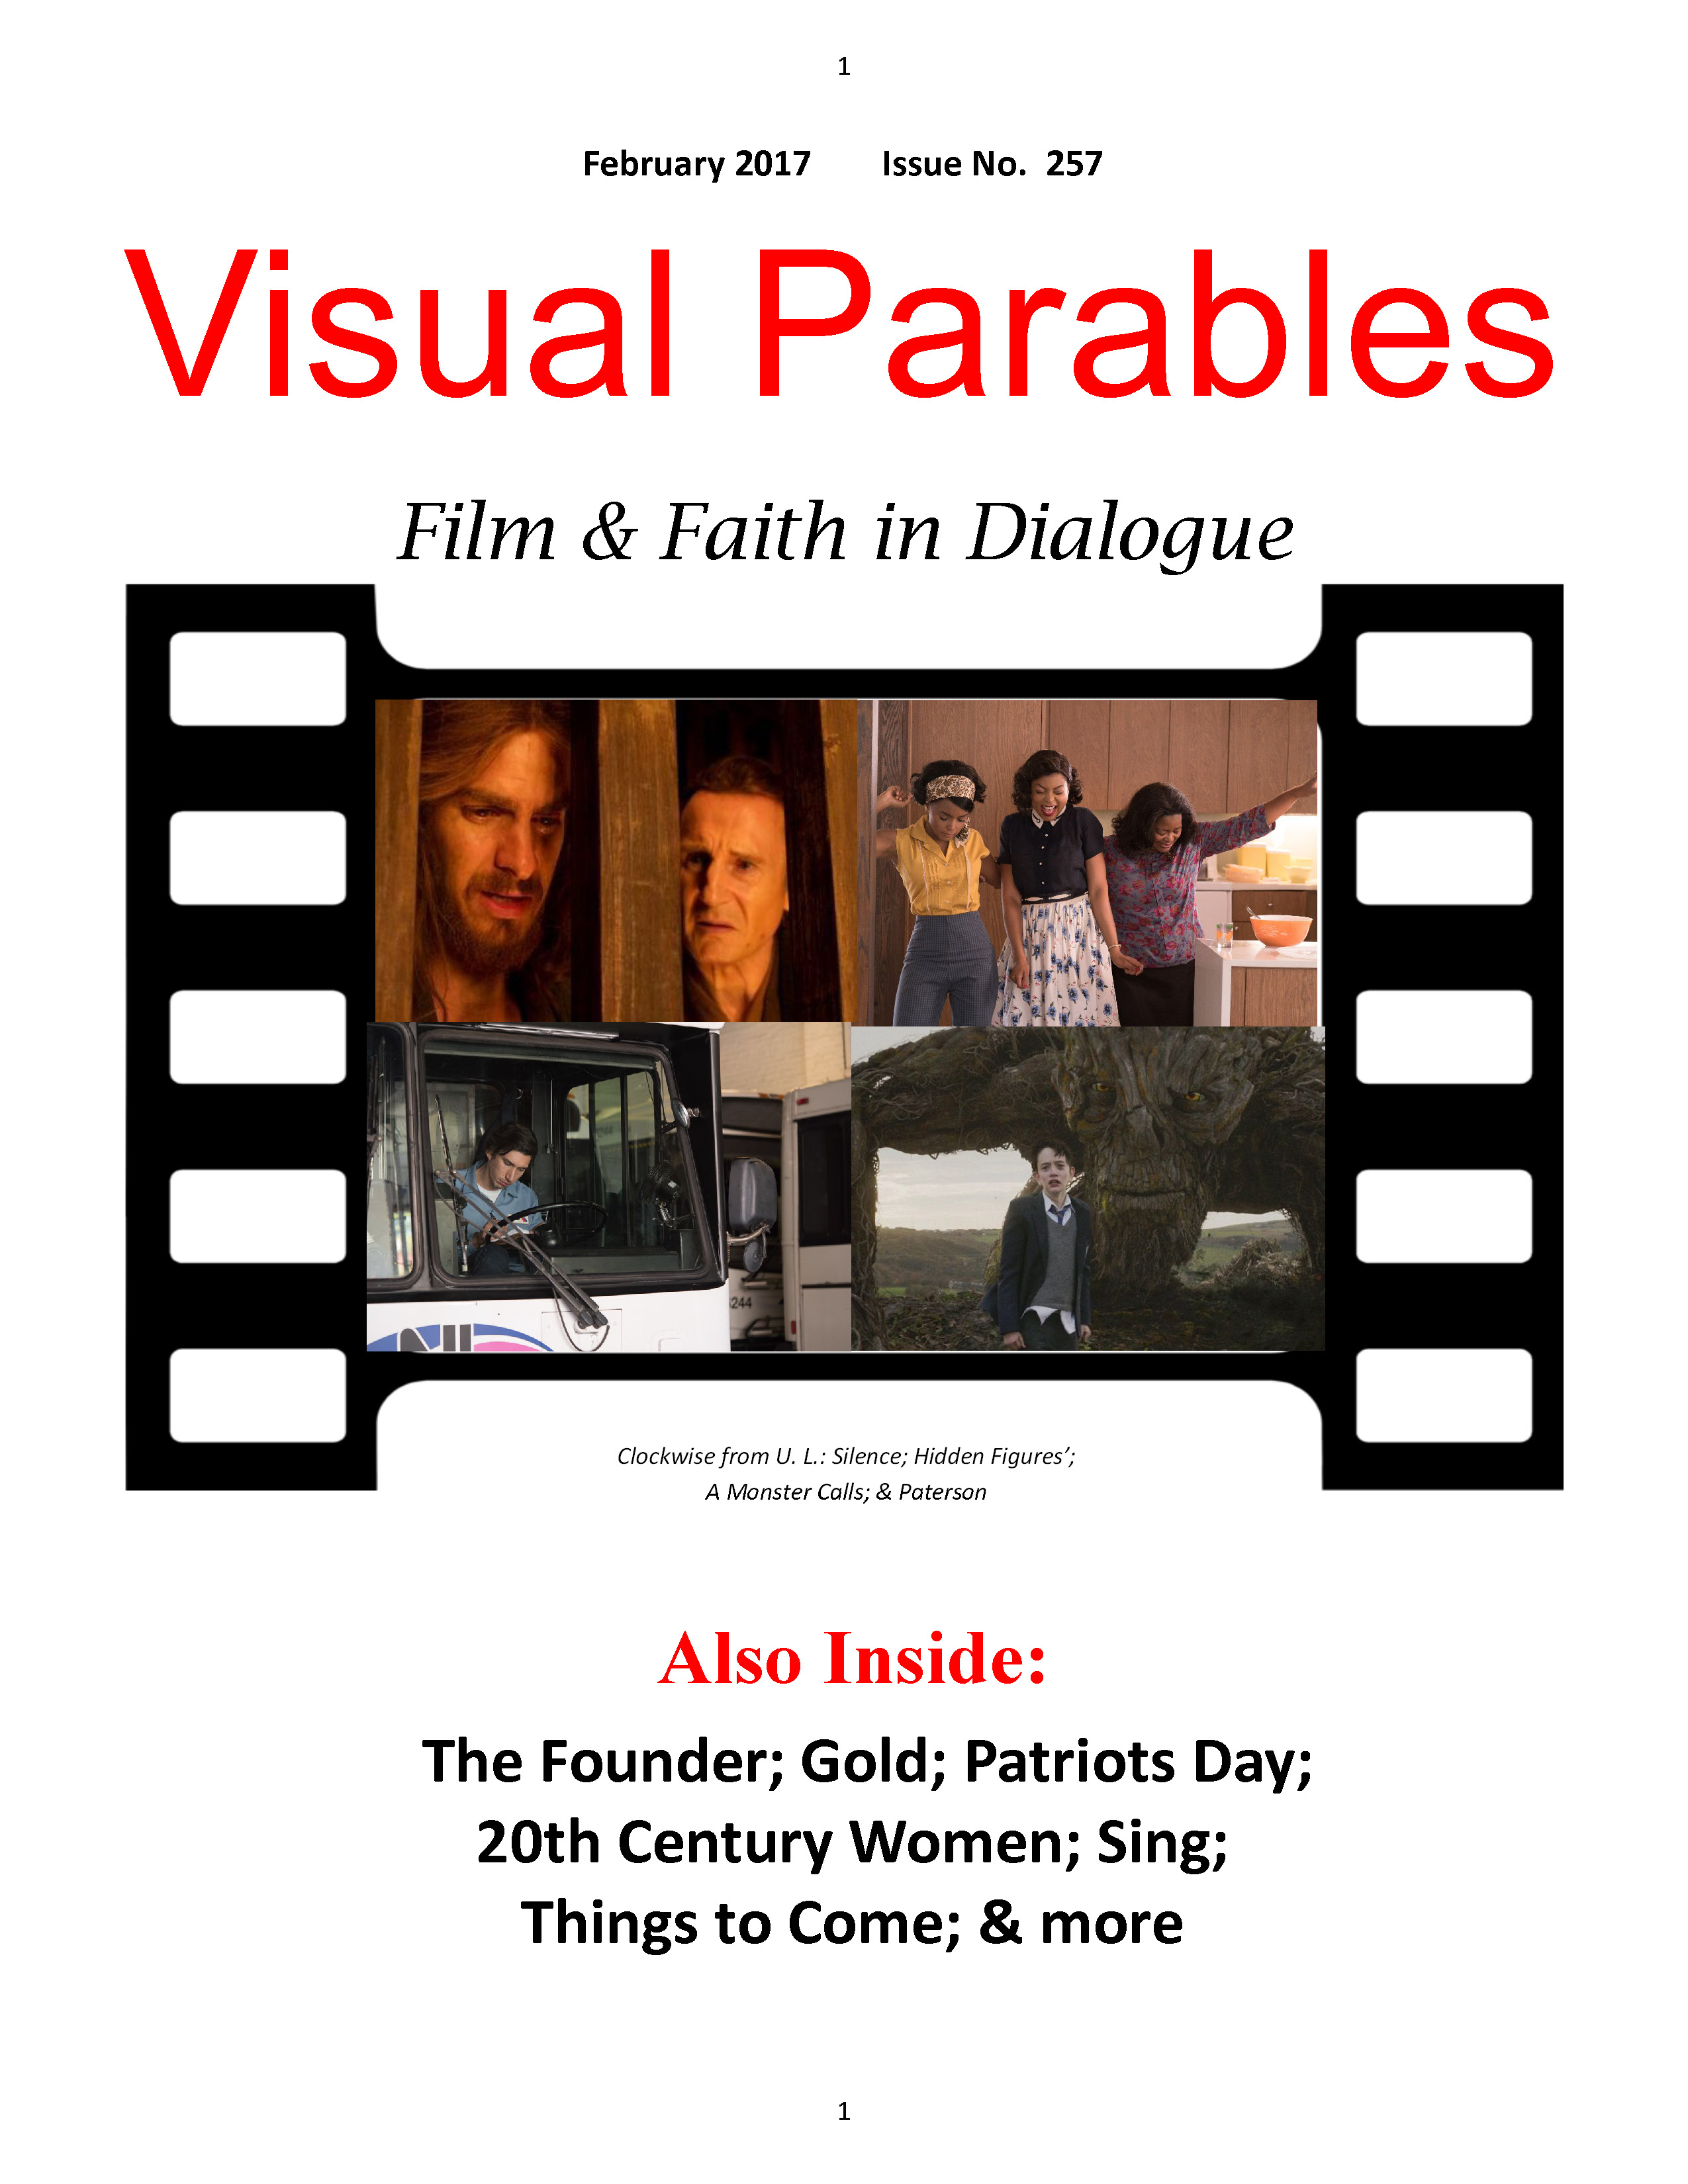 February 2017 issue of Visual Parables